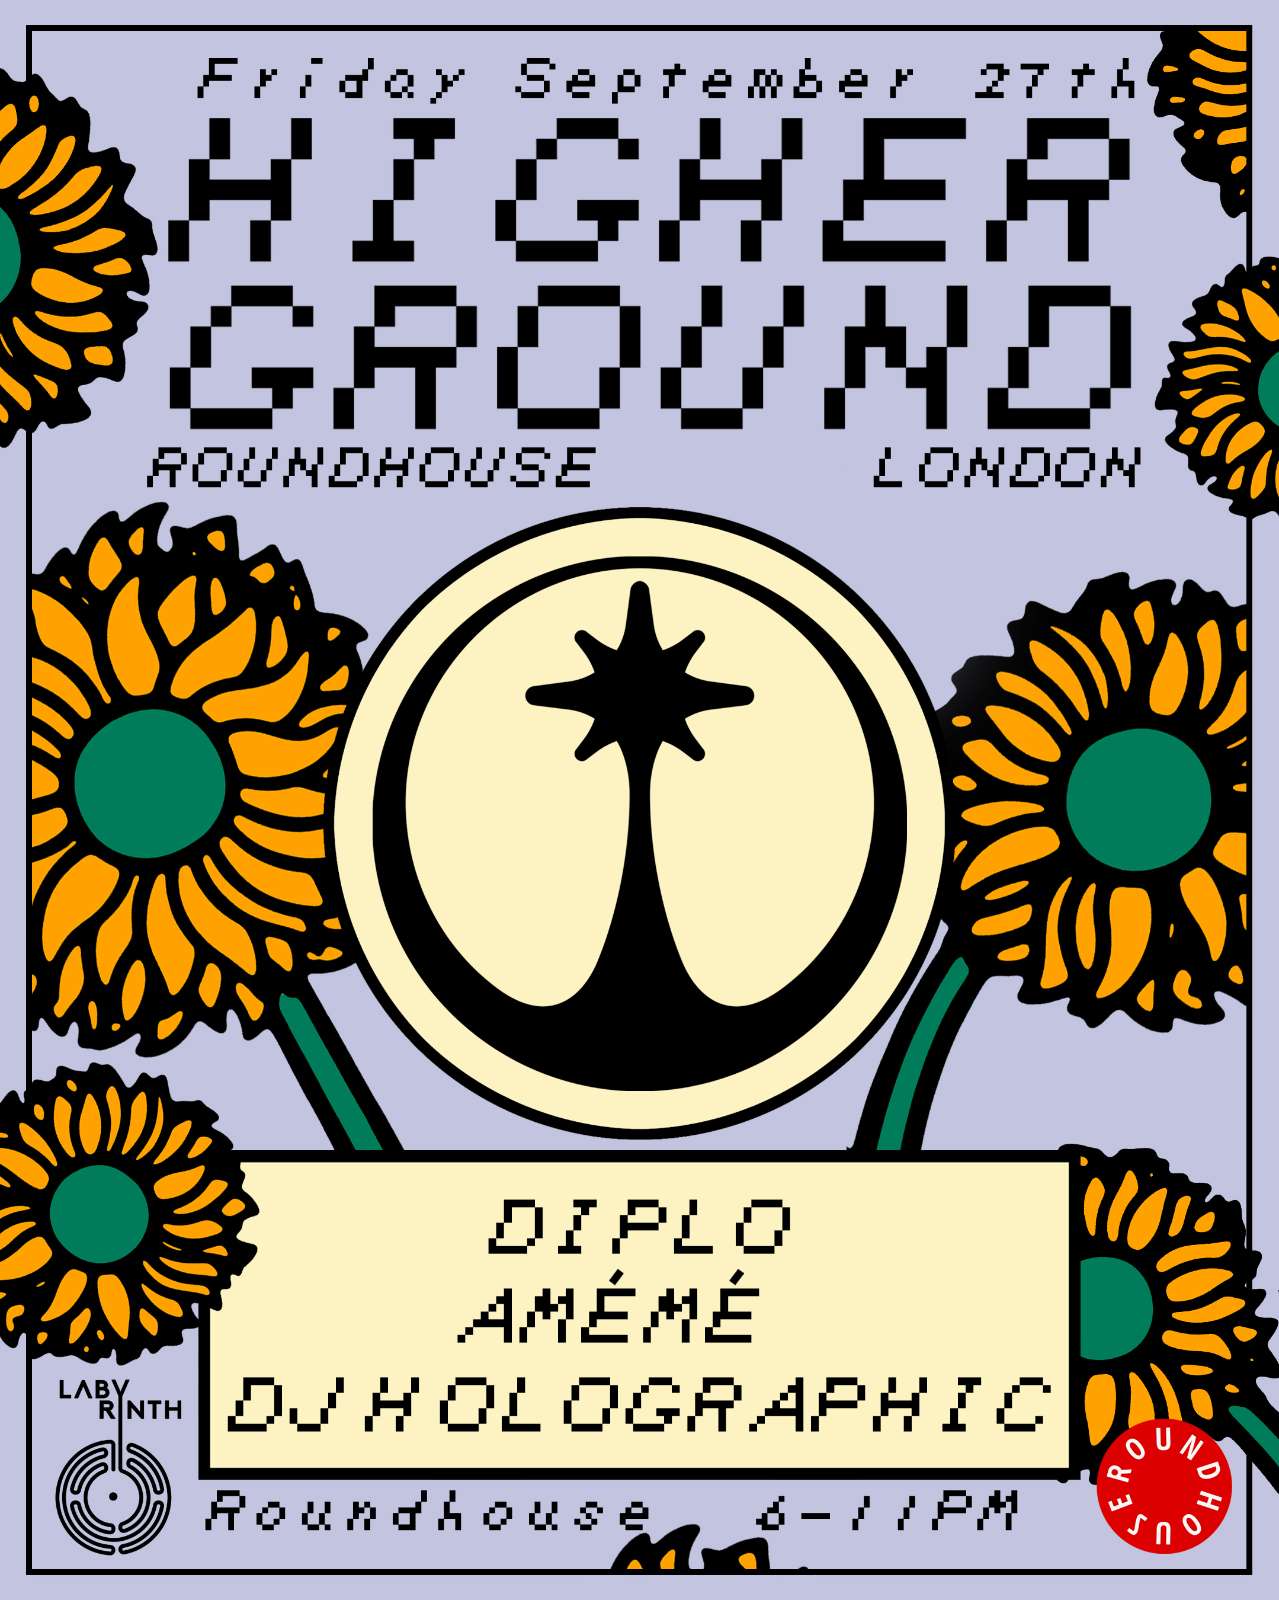 Diplo presents Higher Ground at Roundhouse